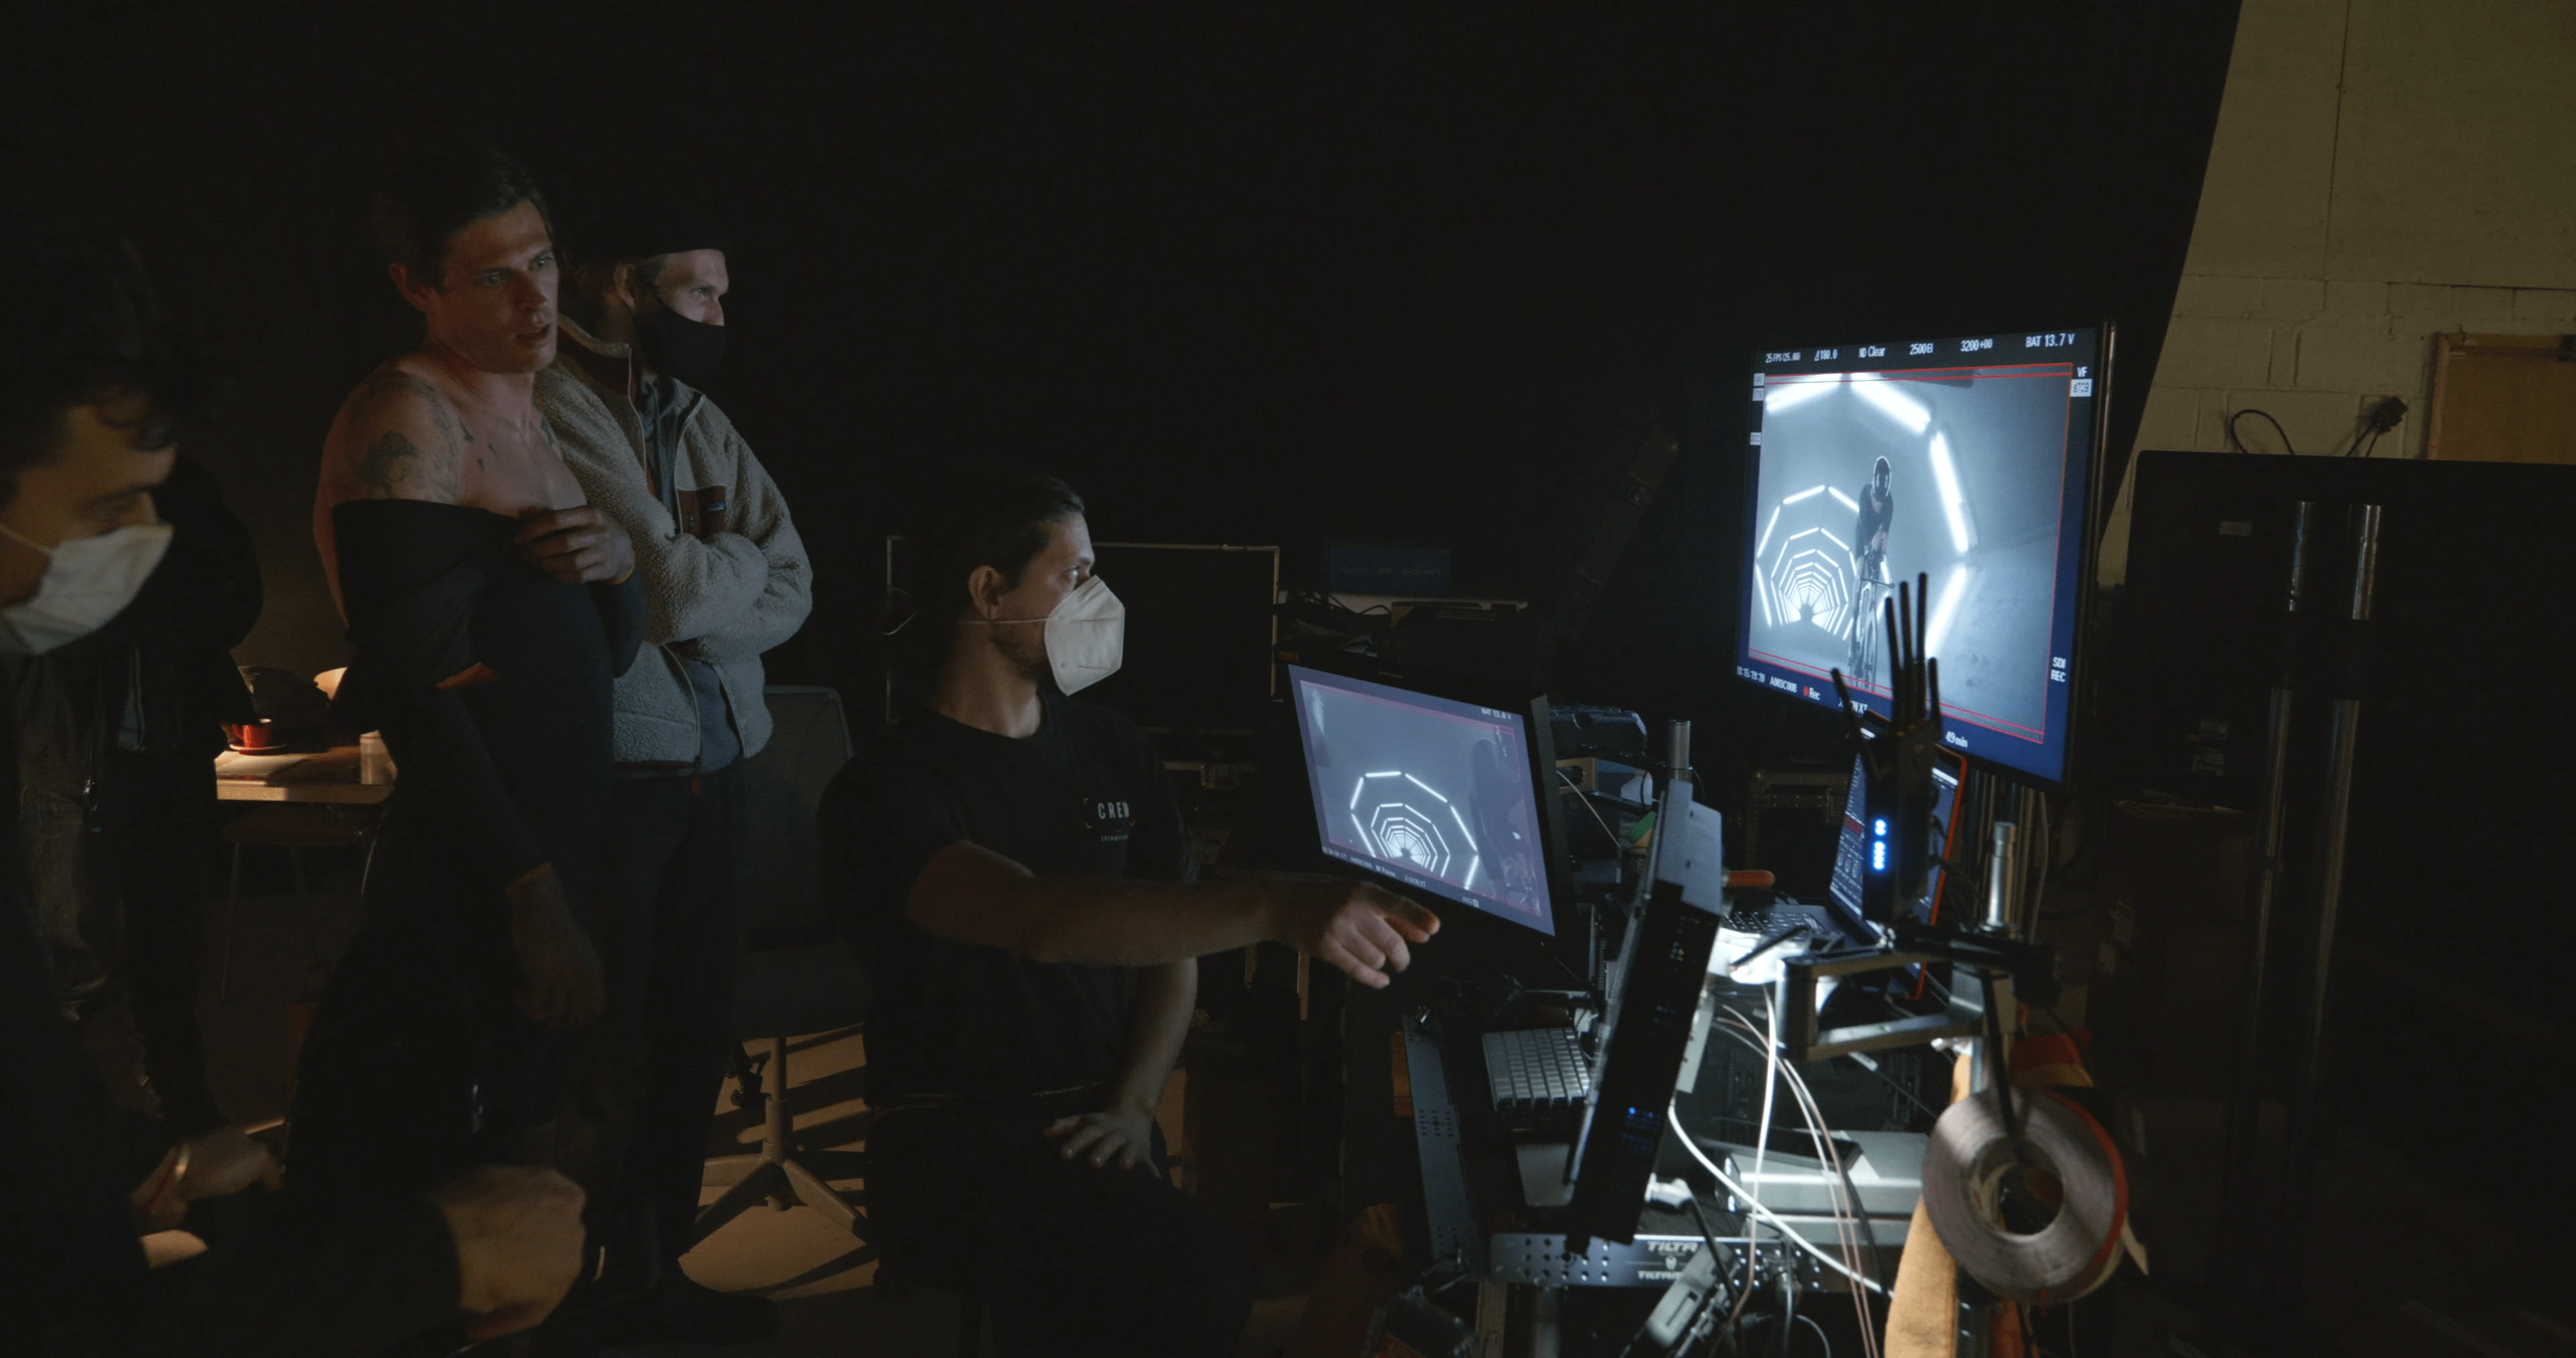 A group of people at LeCol x McLaren in a dark room looking at a computer screen.